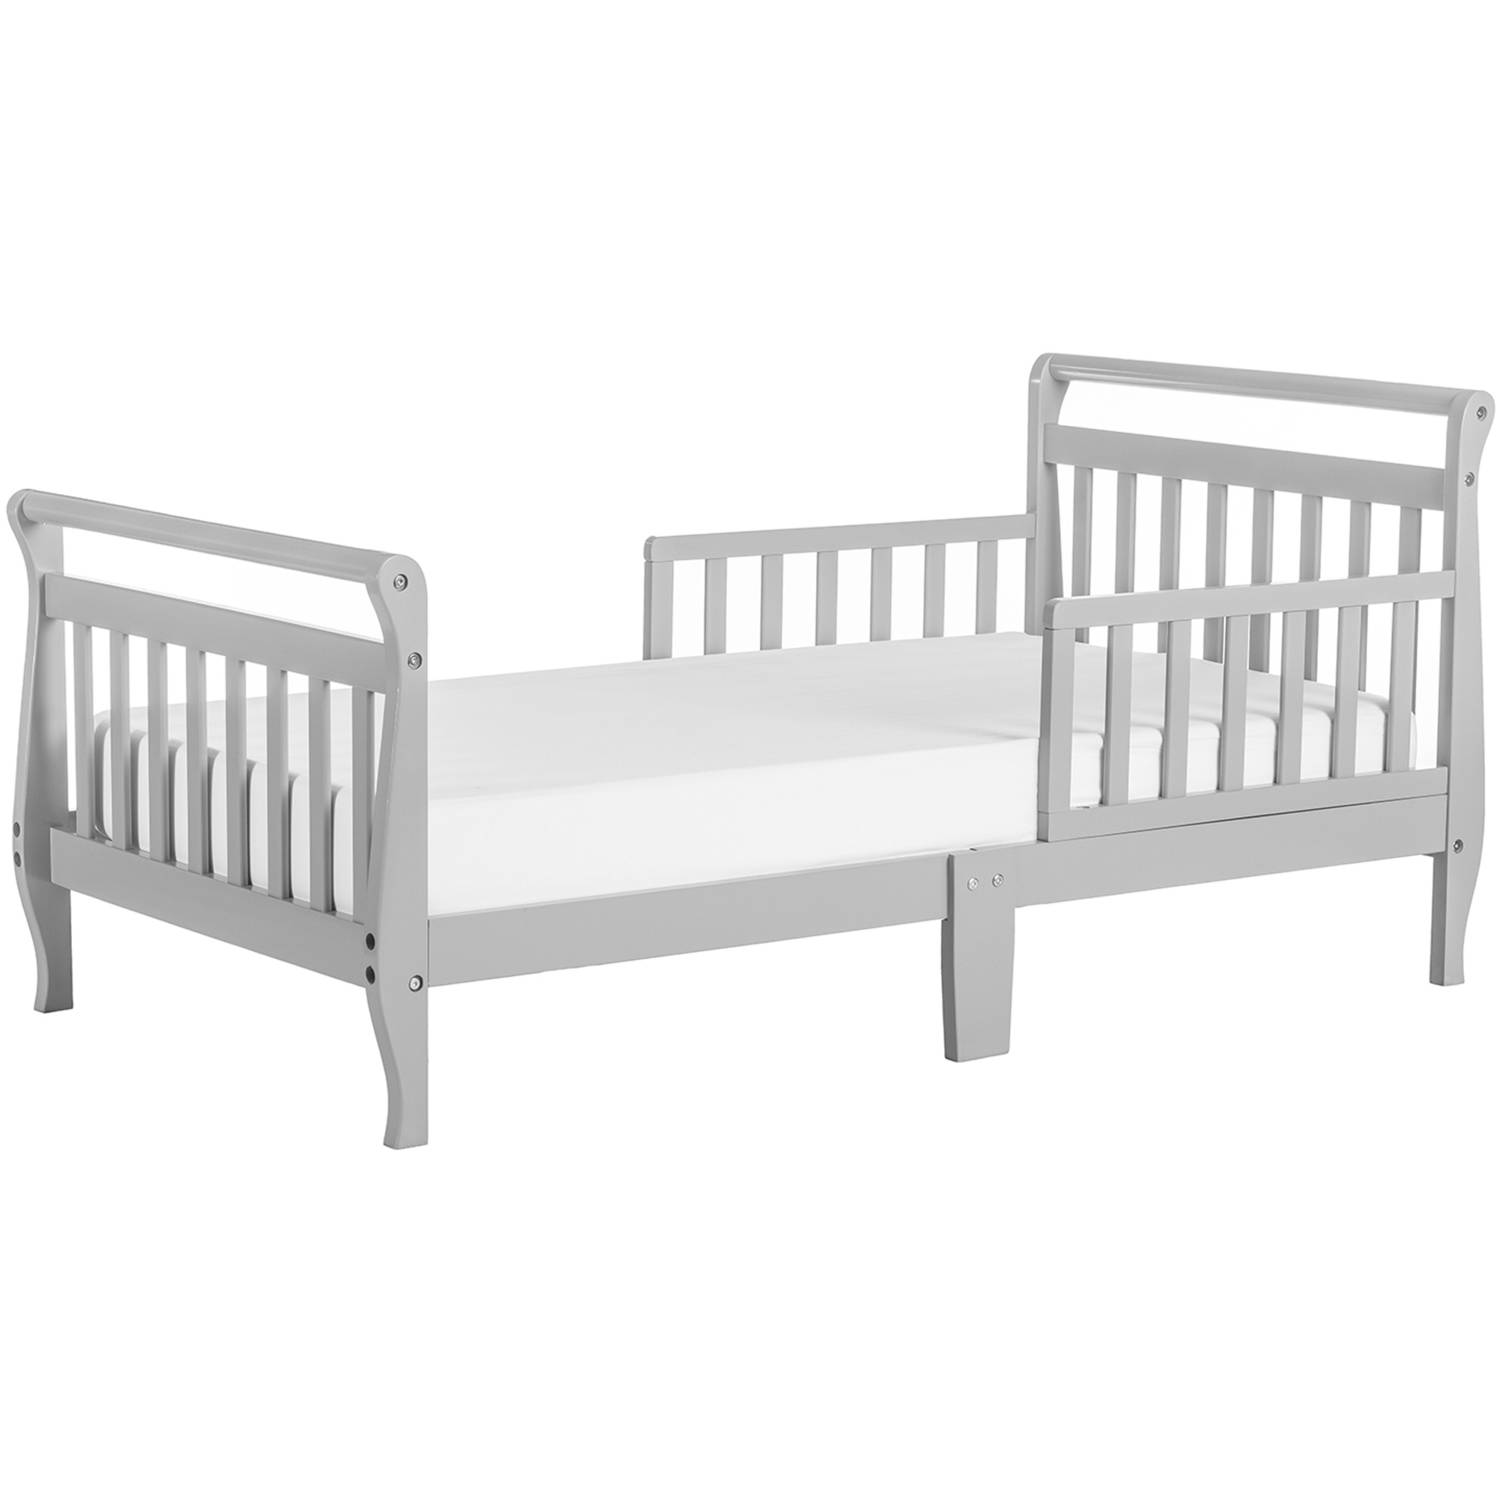 Dream On Me Sleigh Toddler Bed, Cool Grey - image 1 of 3